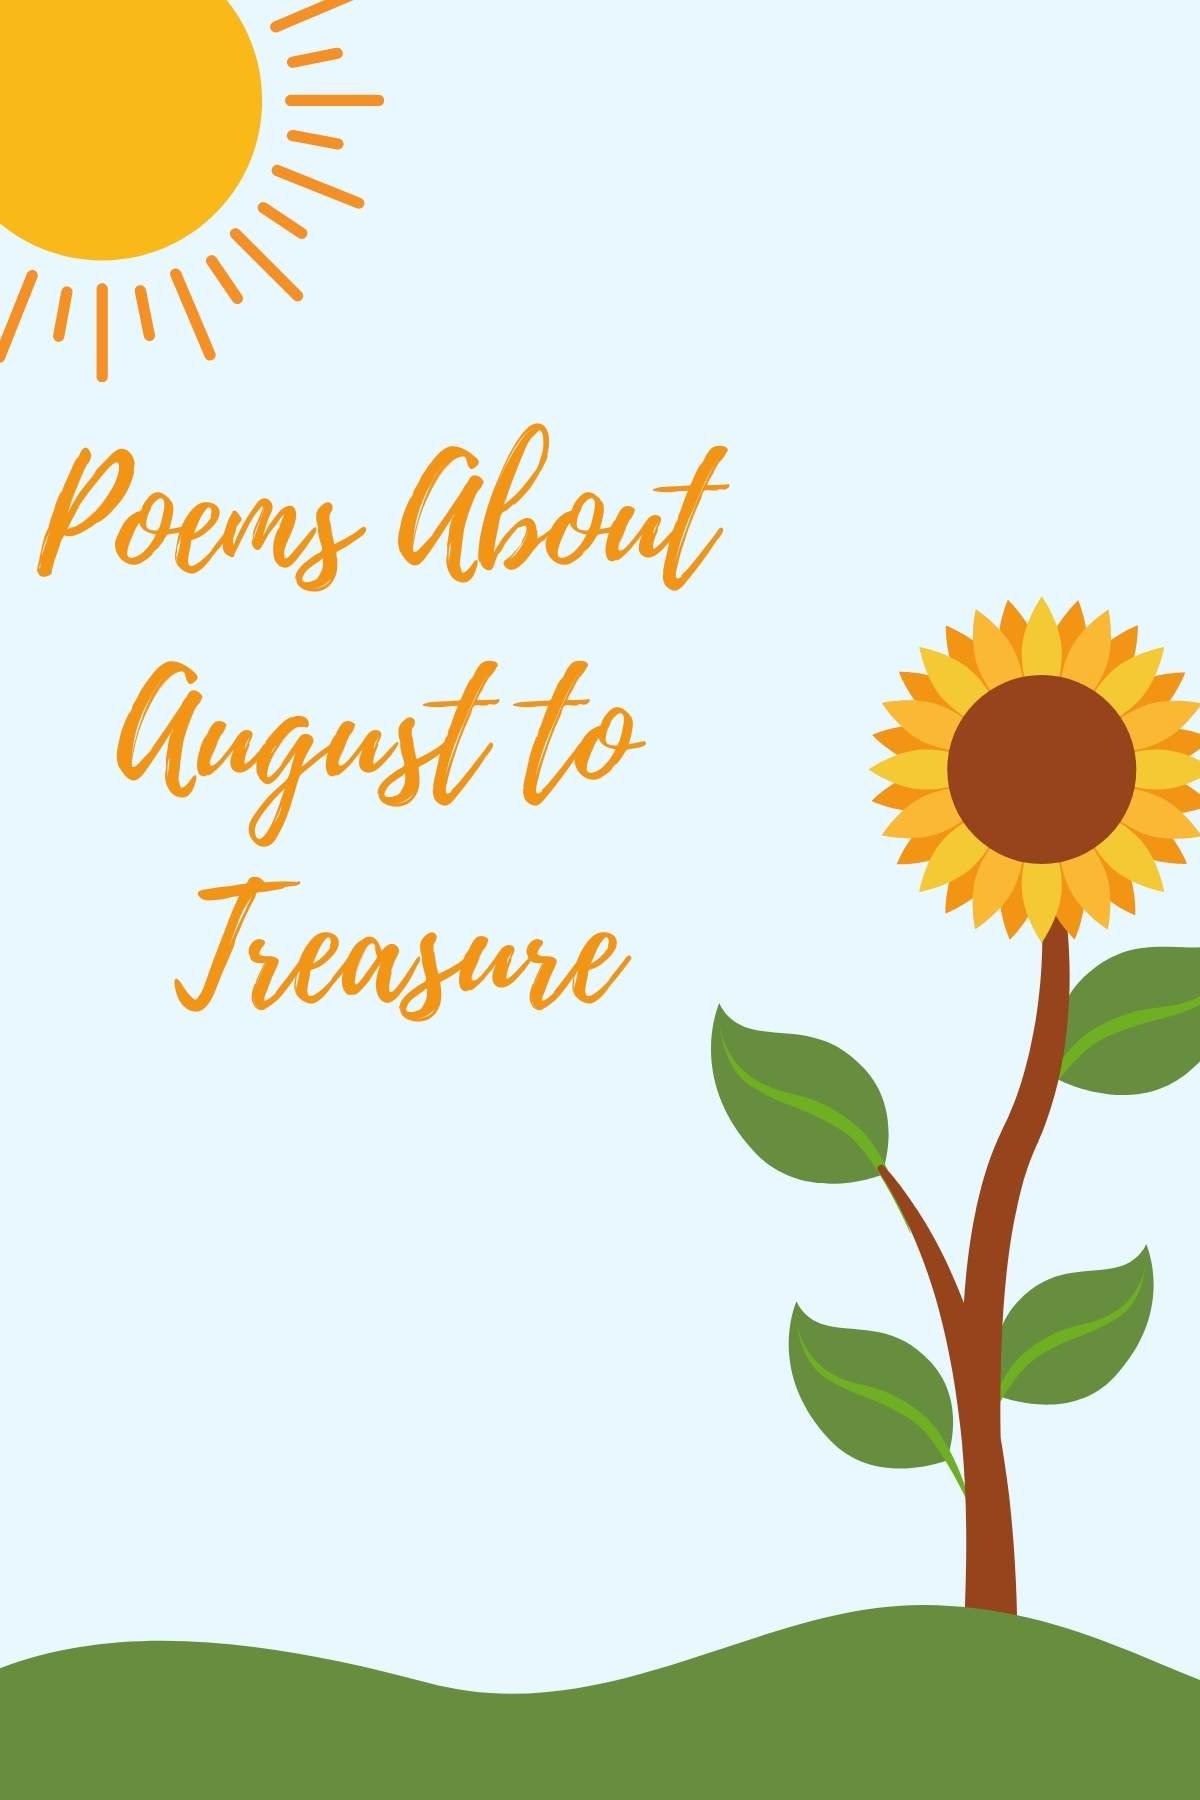 Poems about August to Treasure